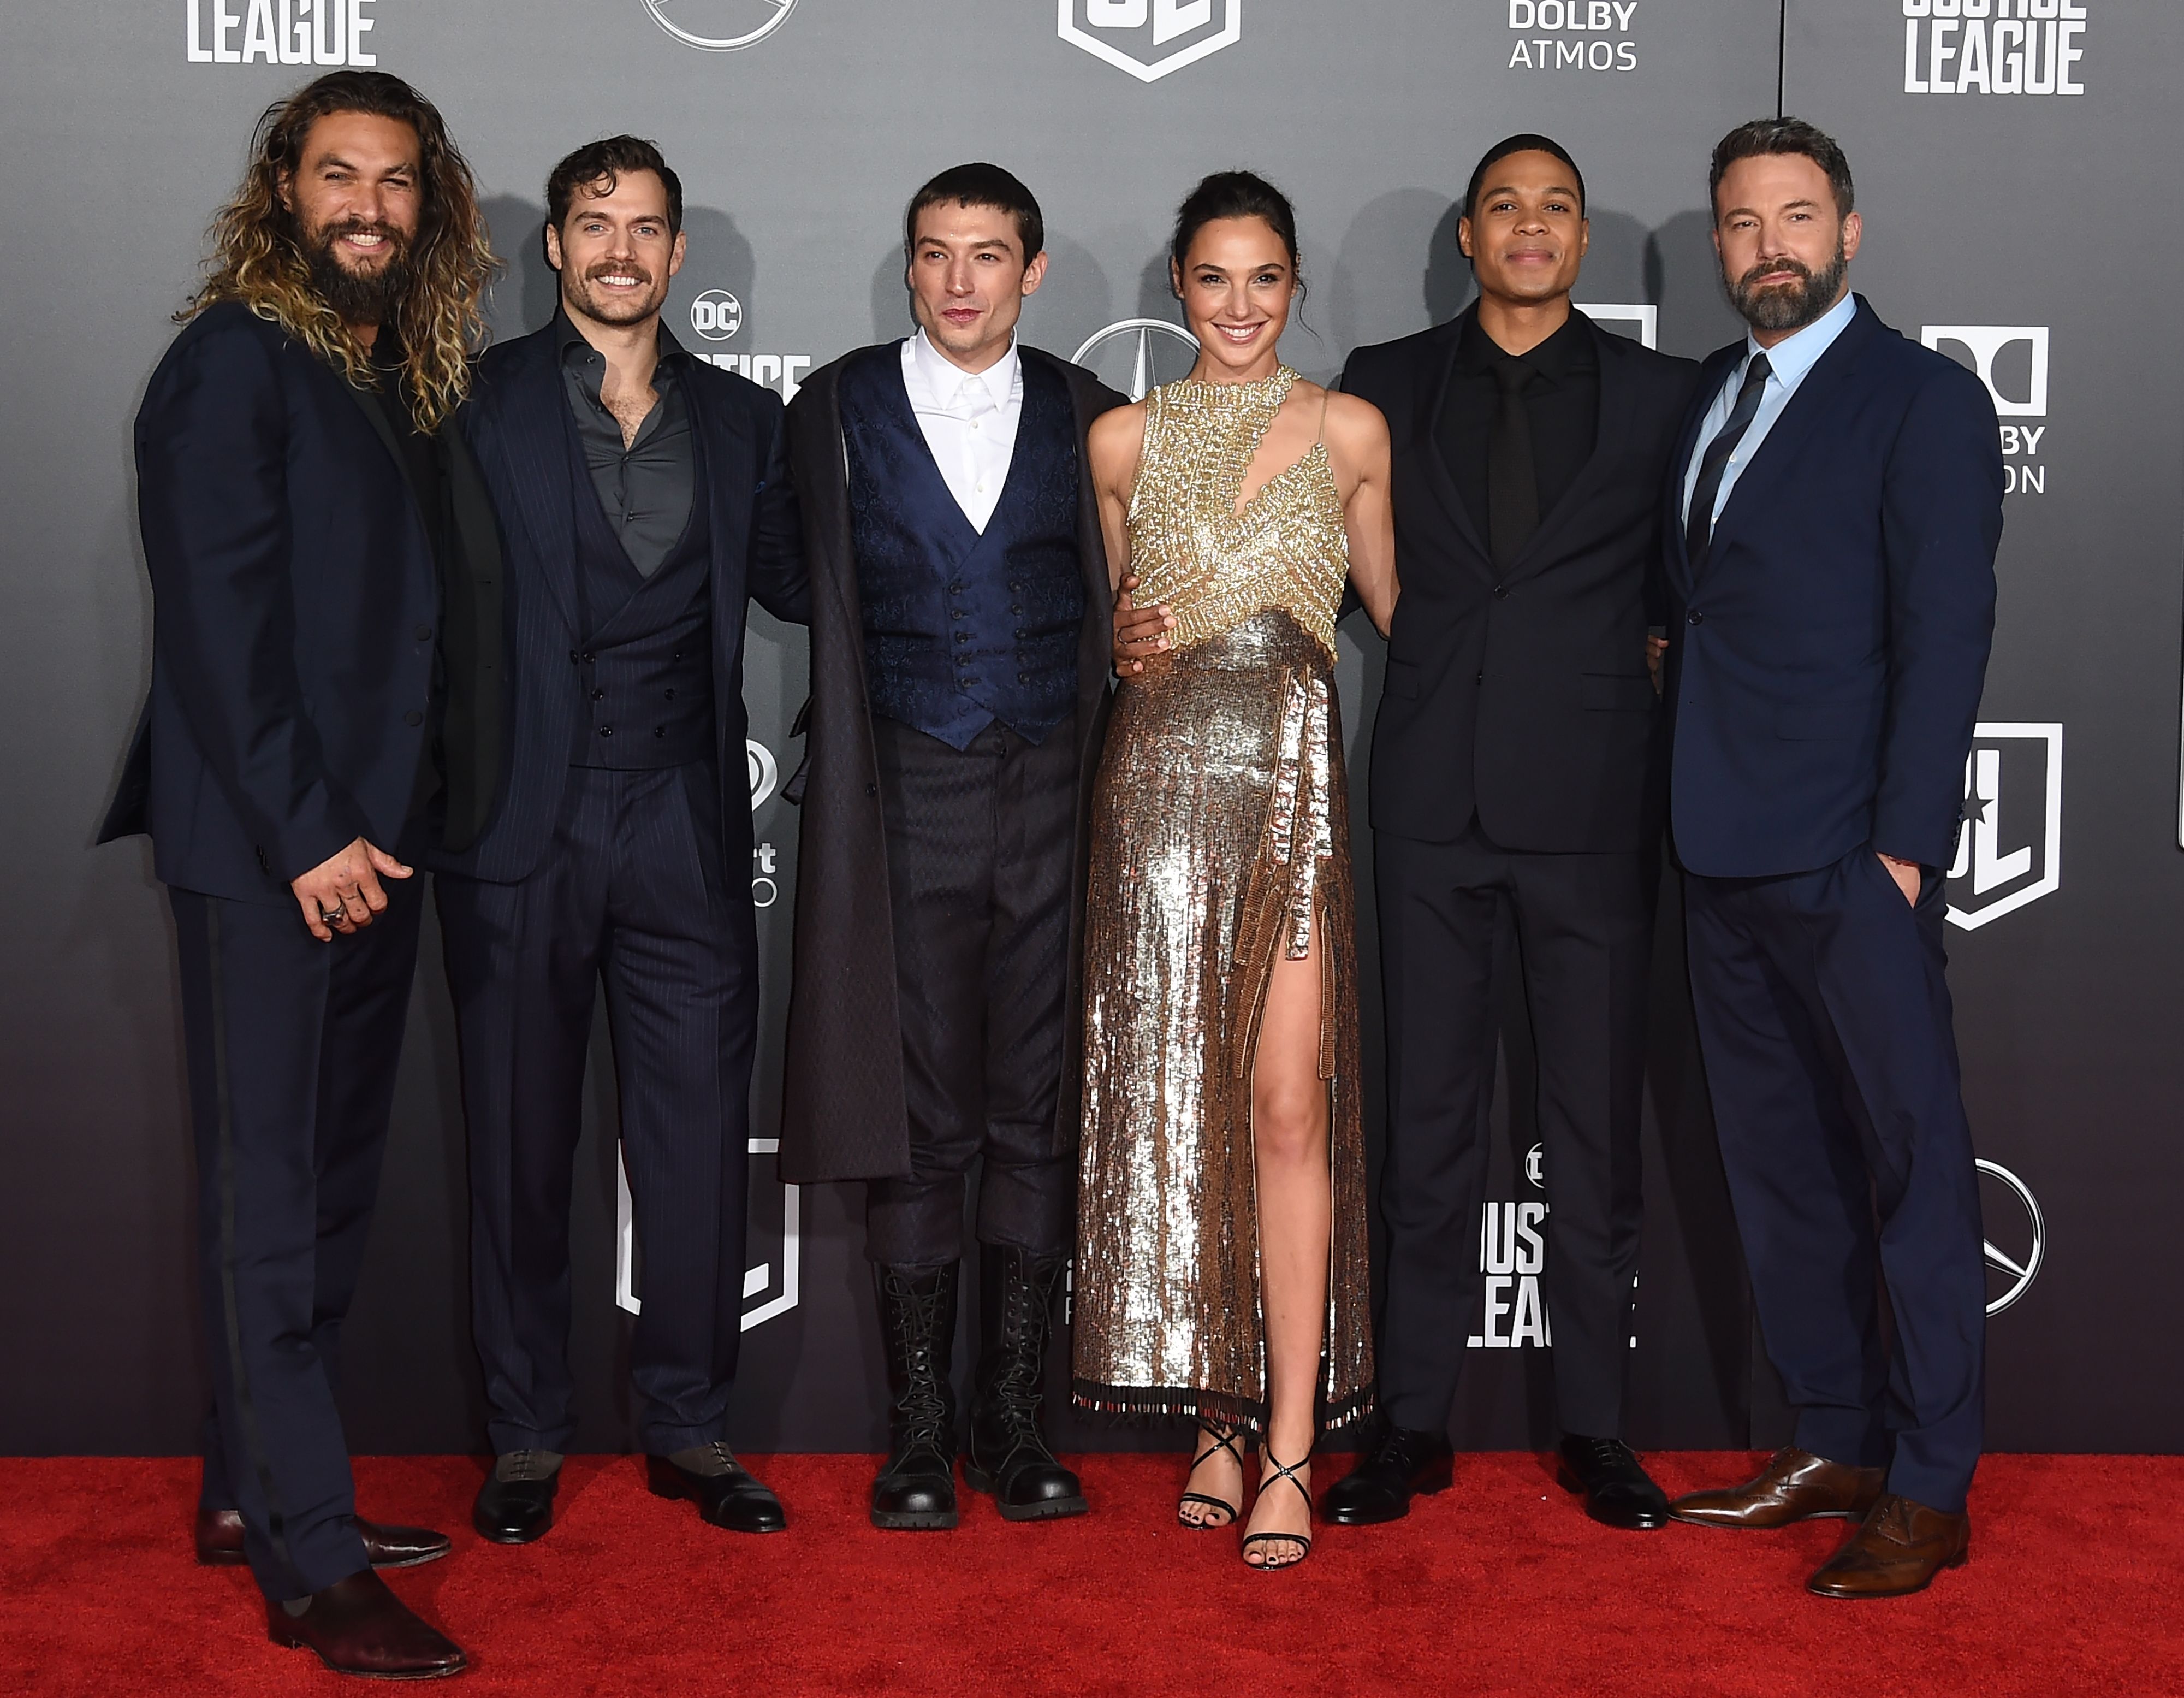 Jason Momoa, Henry Cavill, Ezra Miller, Gal Gadot, Ray Fisher, and Ben Affleck, who star in the comic book movie 'Justice League,' pose for pictures on the red carpet for the premiere.